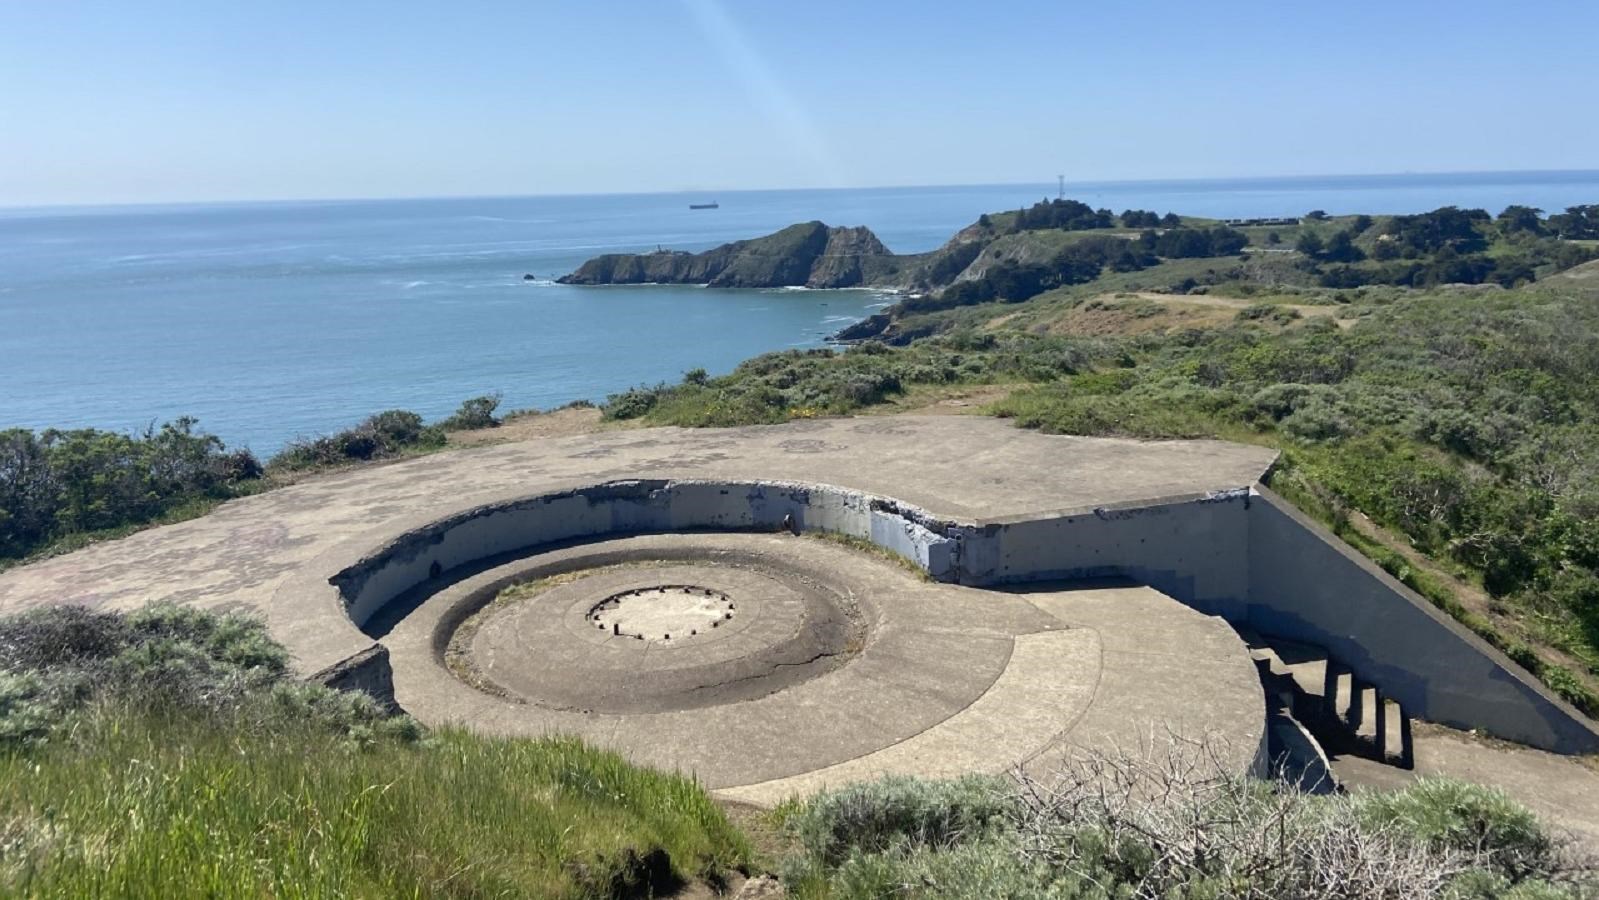 Taken from the top of the concrete casemate with Point Bonita in the distance.